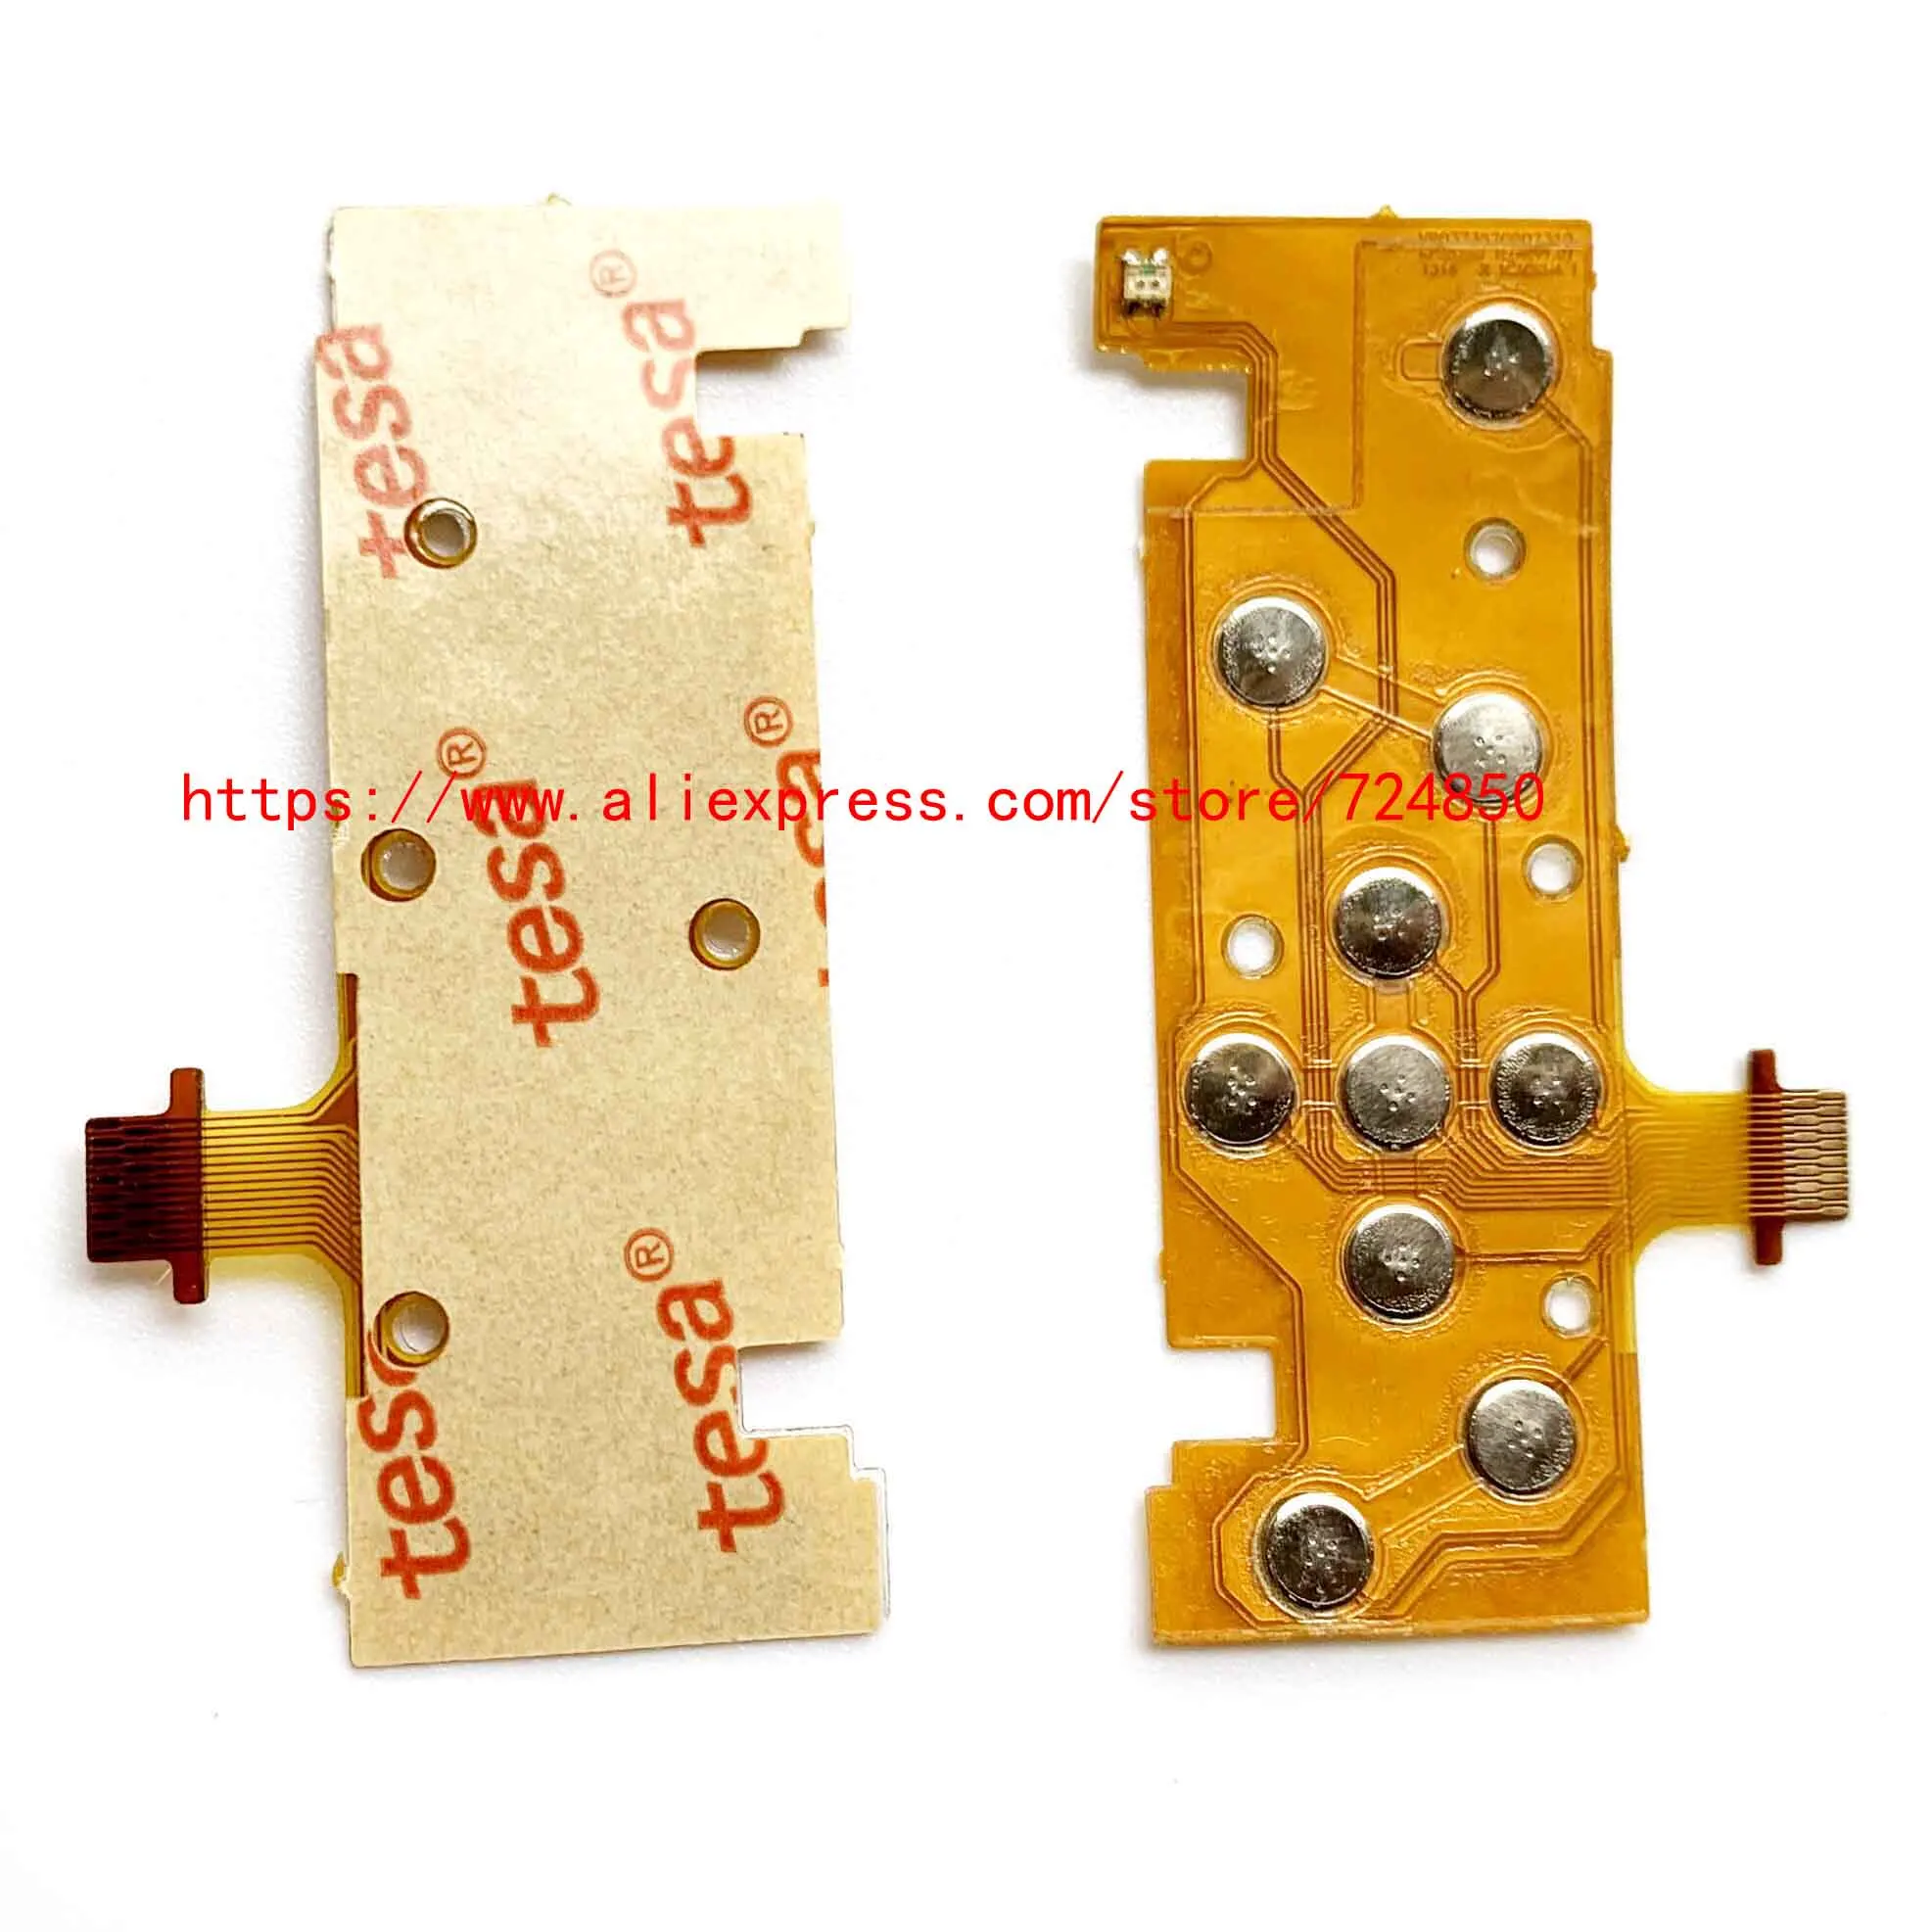 

NEW Digital Camera Repair Part for NIKON Coolpix S5200 Function Keyboard Key Button Flex Cable Ribbon Board